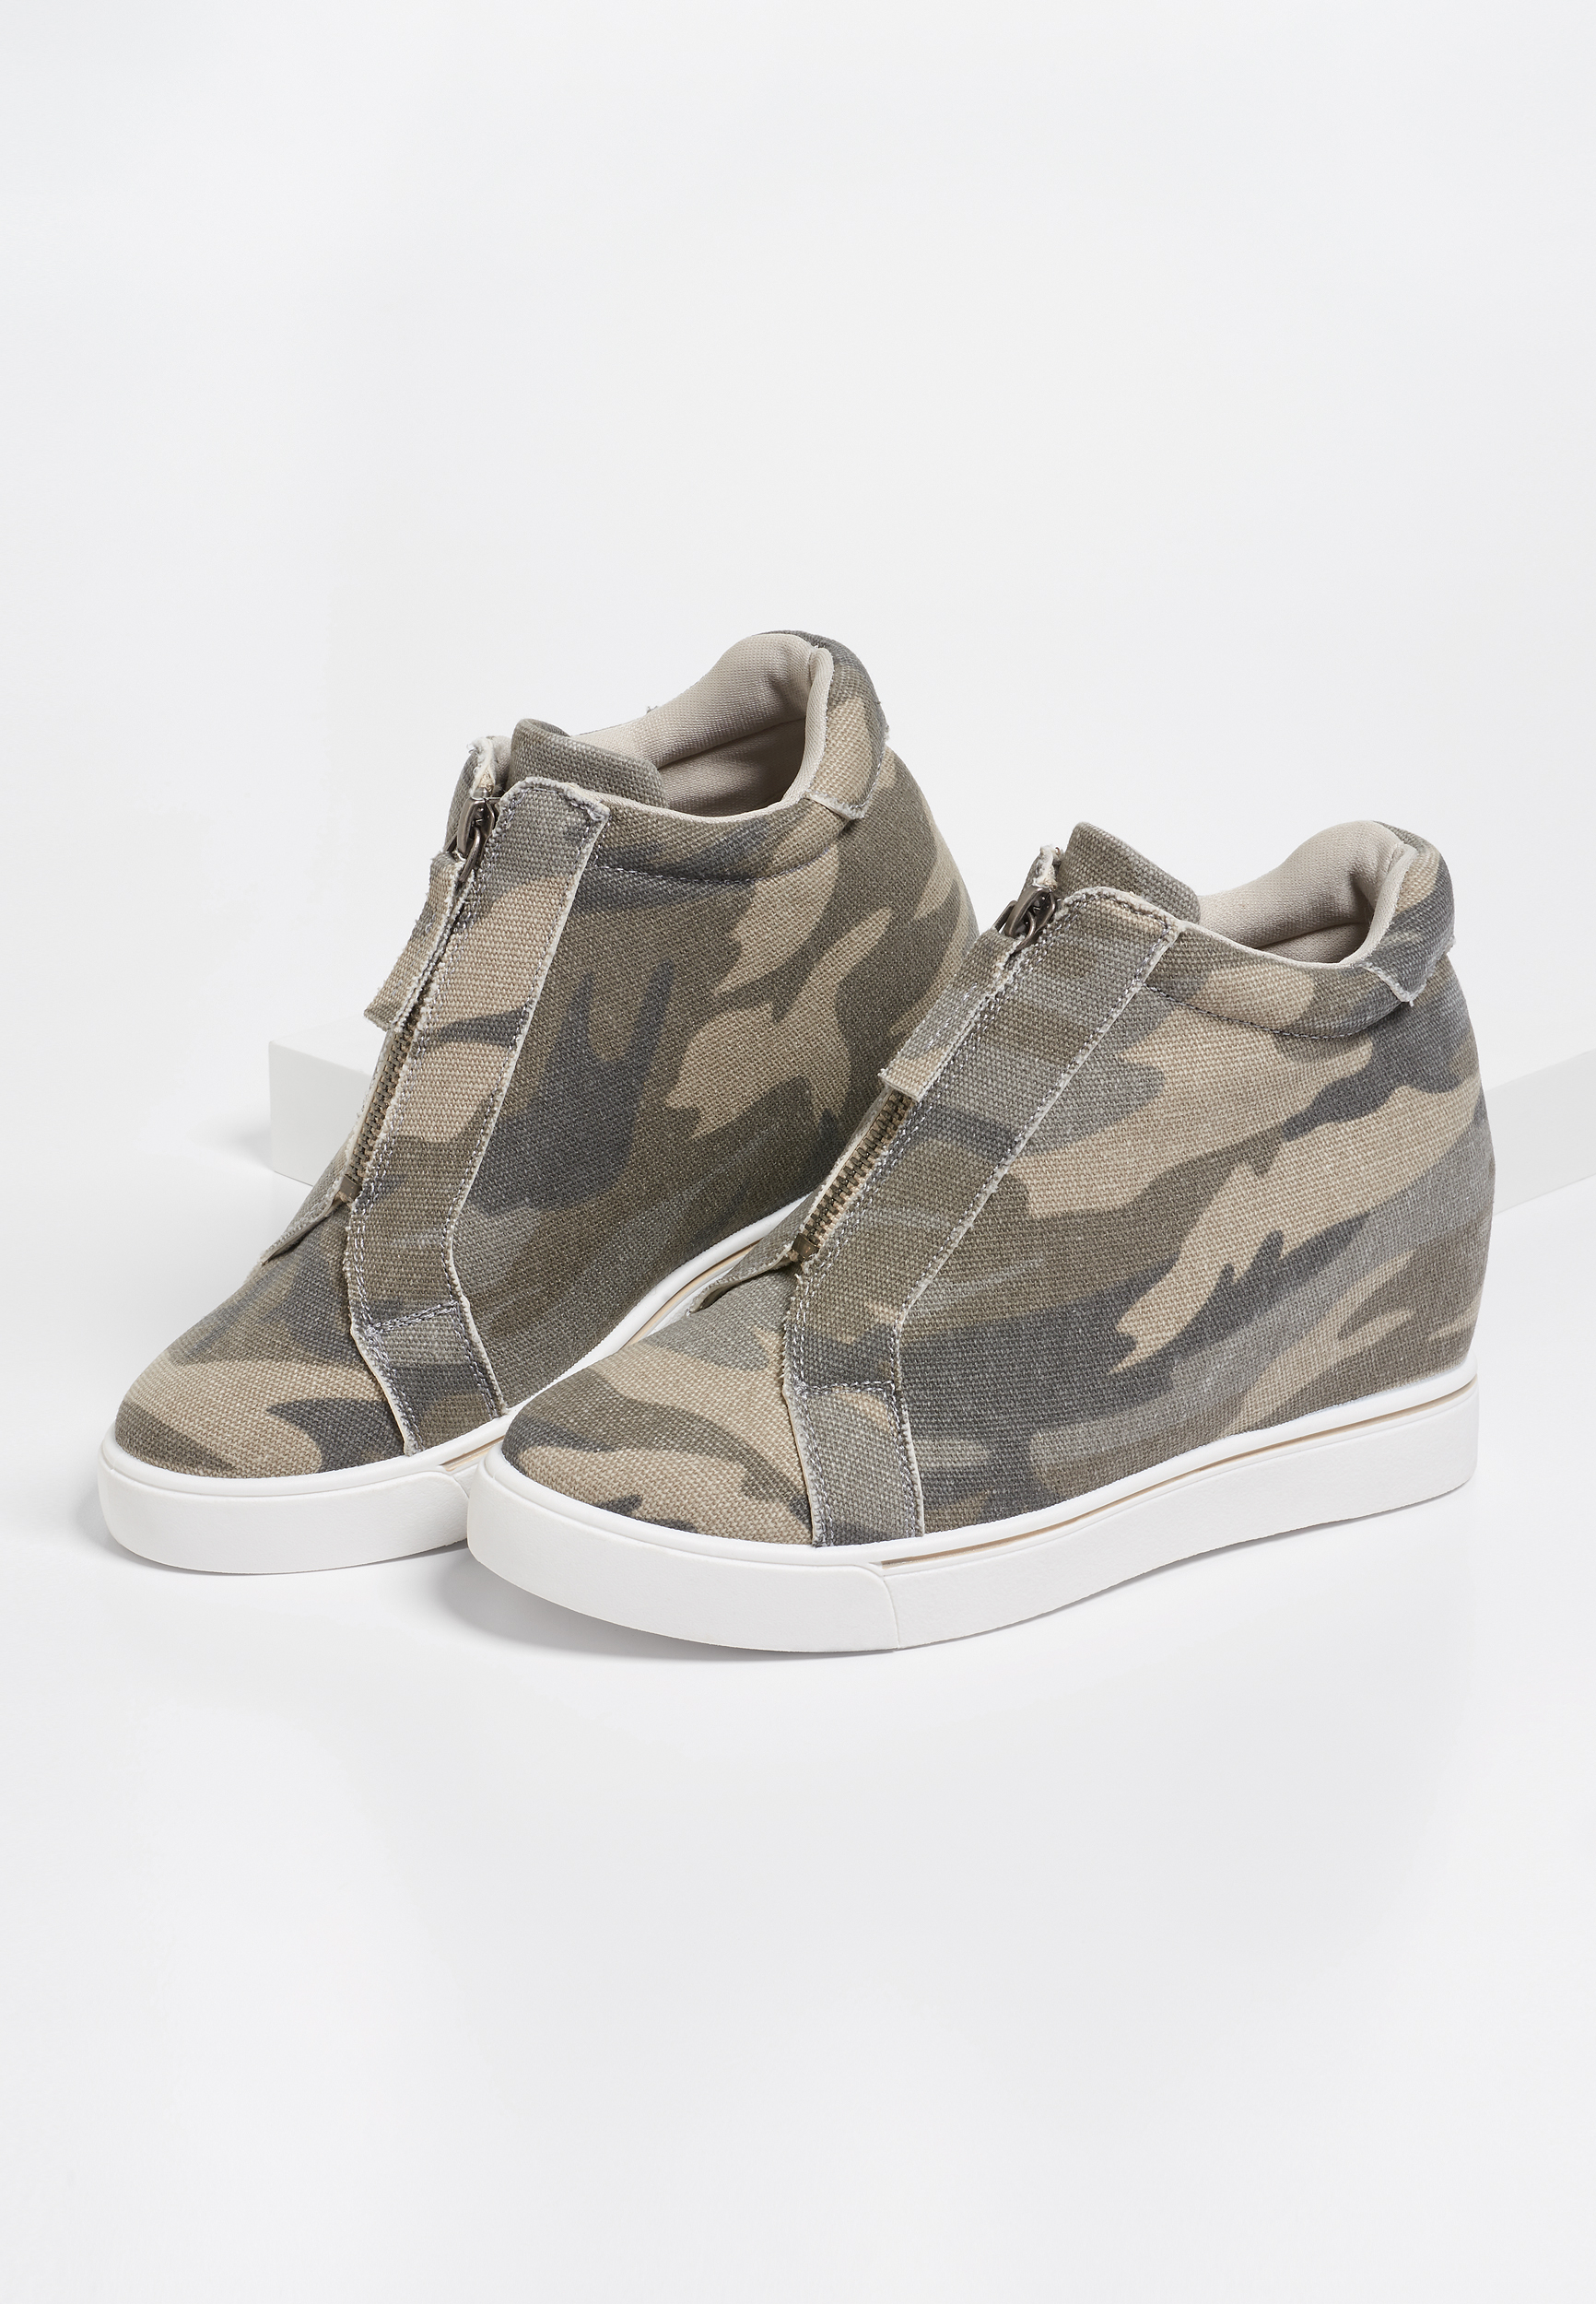 camouflage wedge sneakers